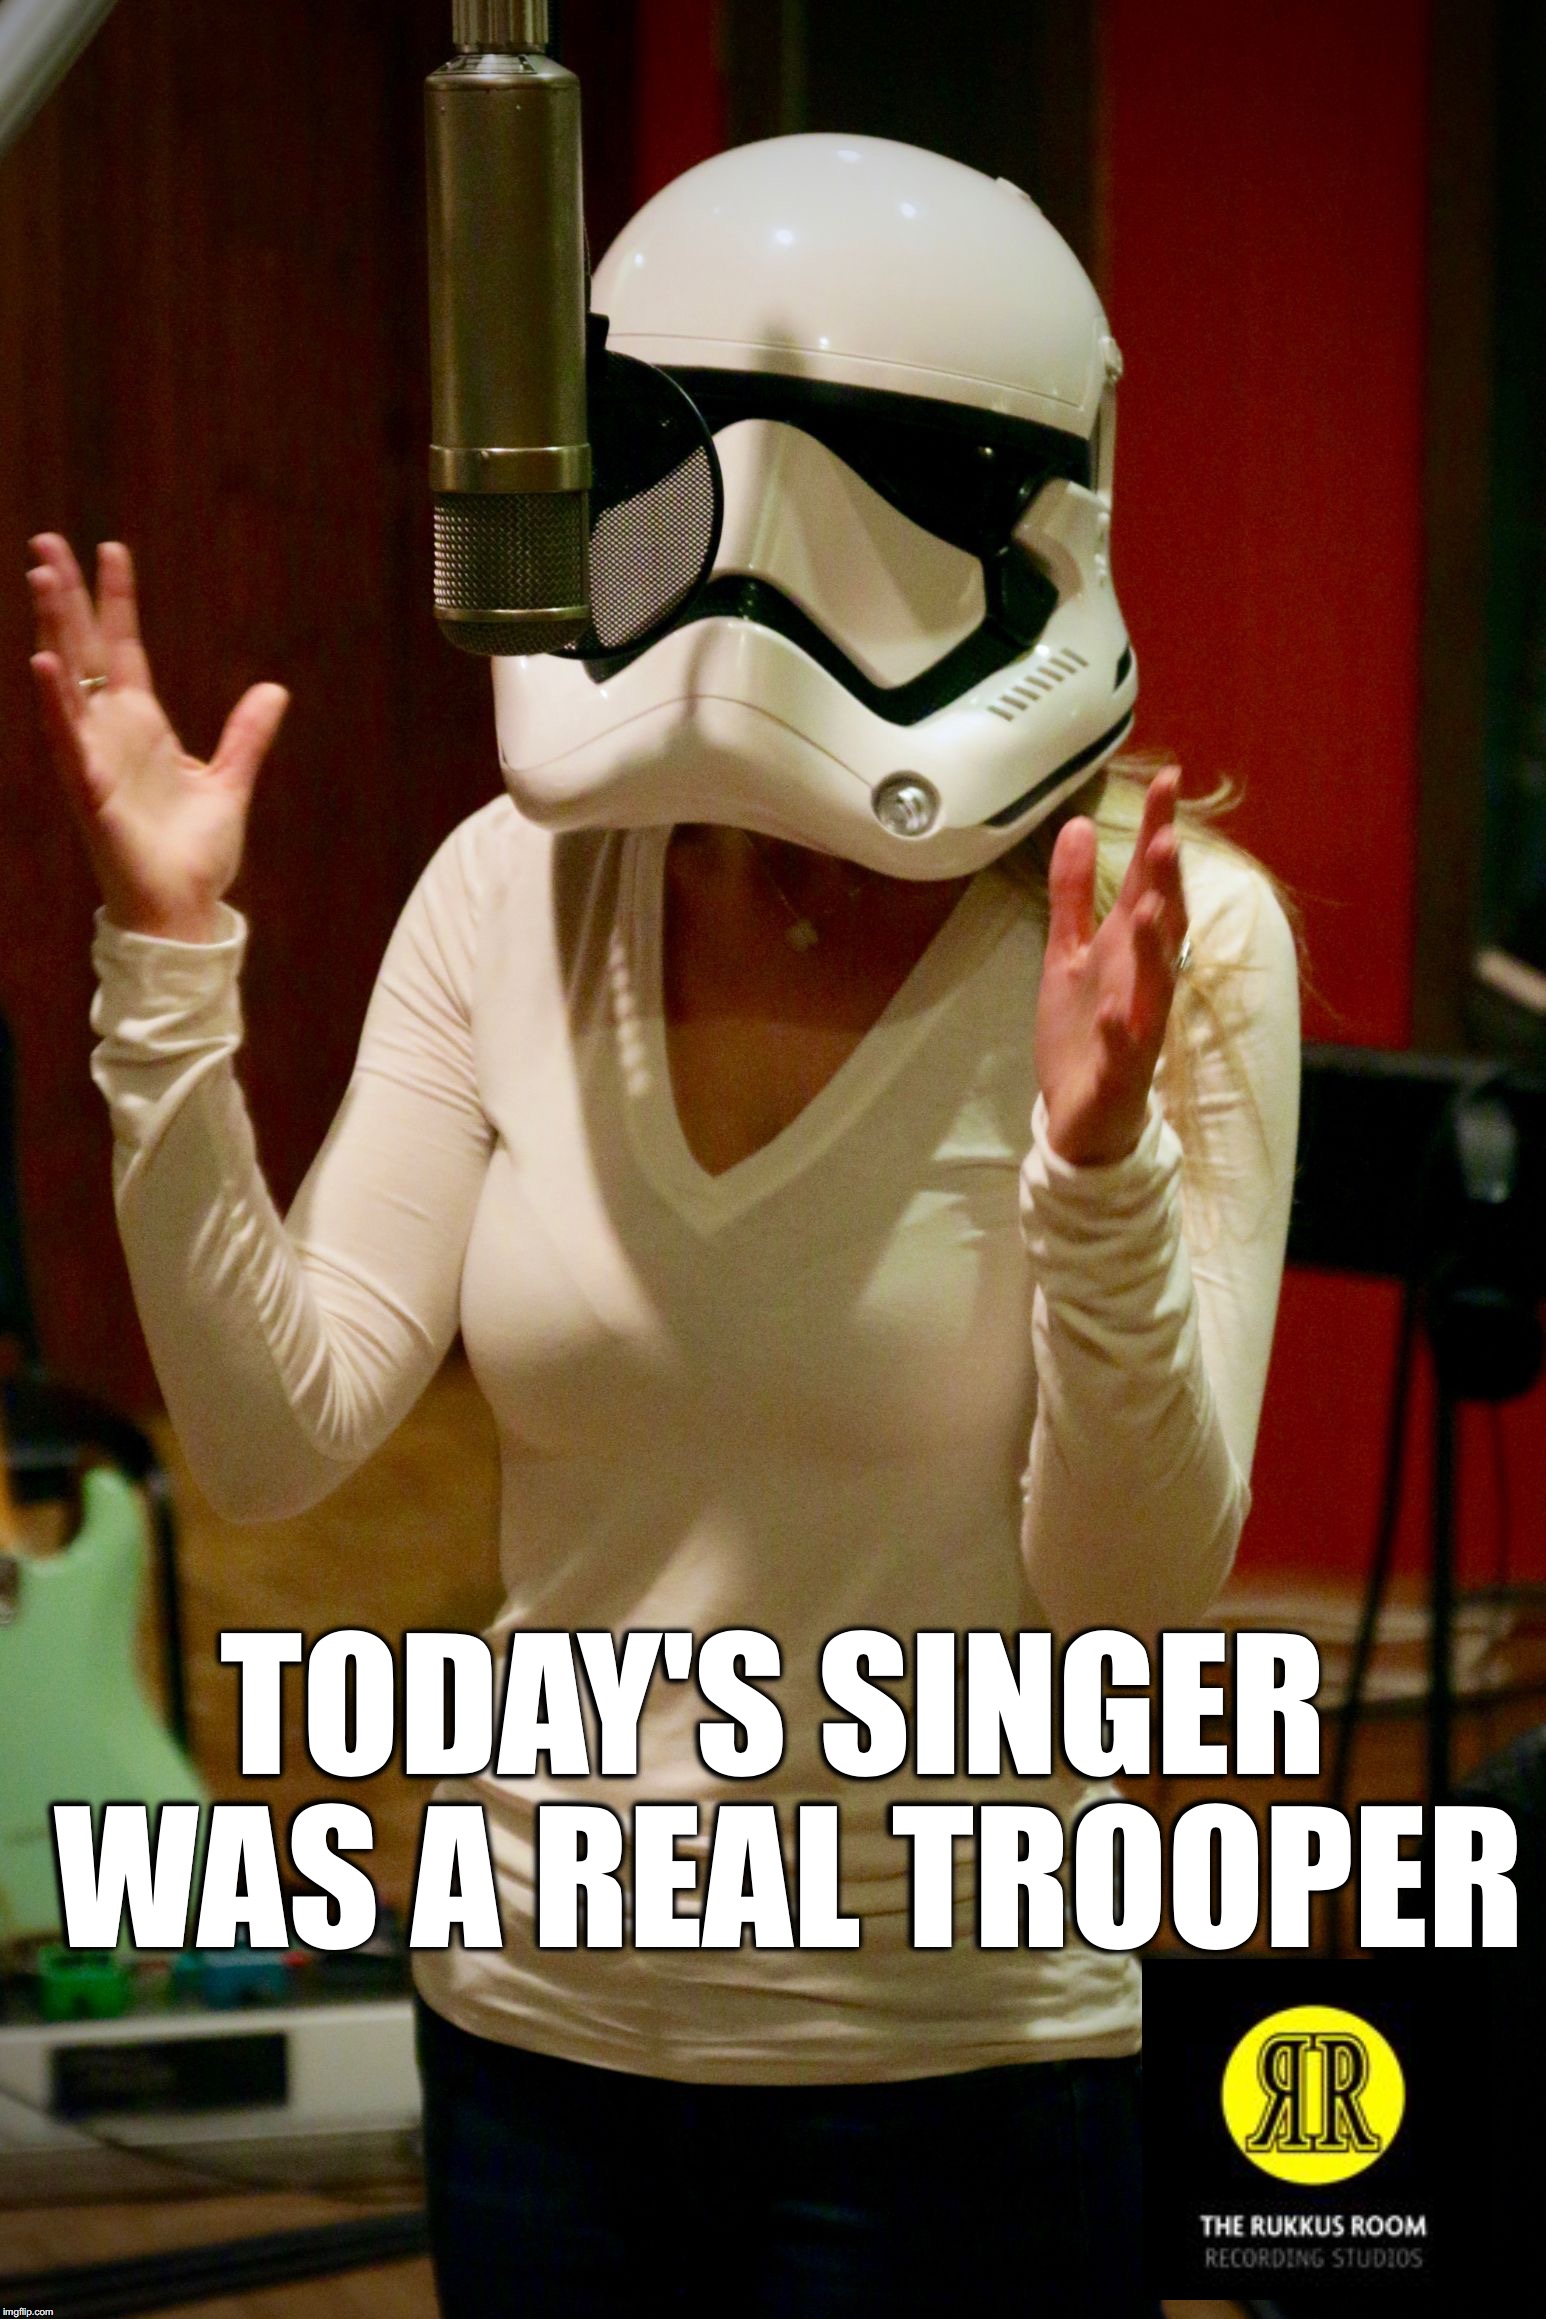 Stormtrooper | TODAY'S SINGER WAS A REAL TROOPER | image tagged in stormtrooper | made w/ Imgflip meme maker